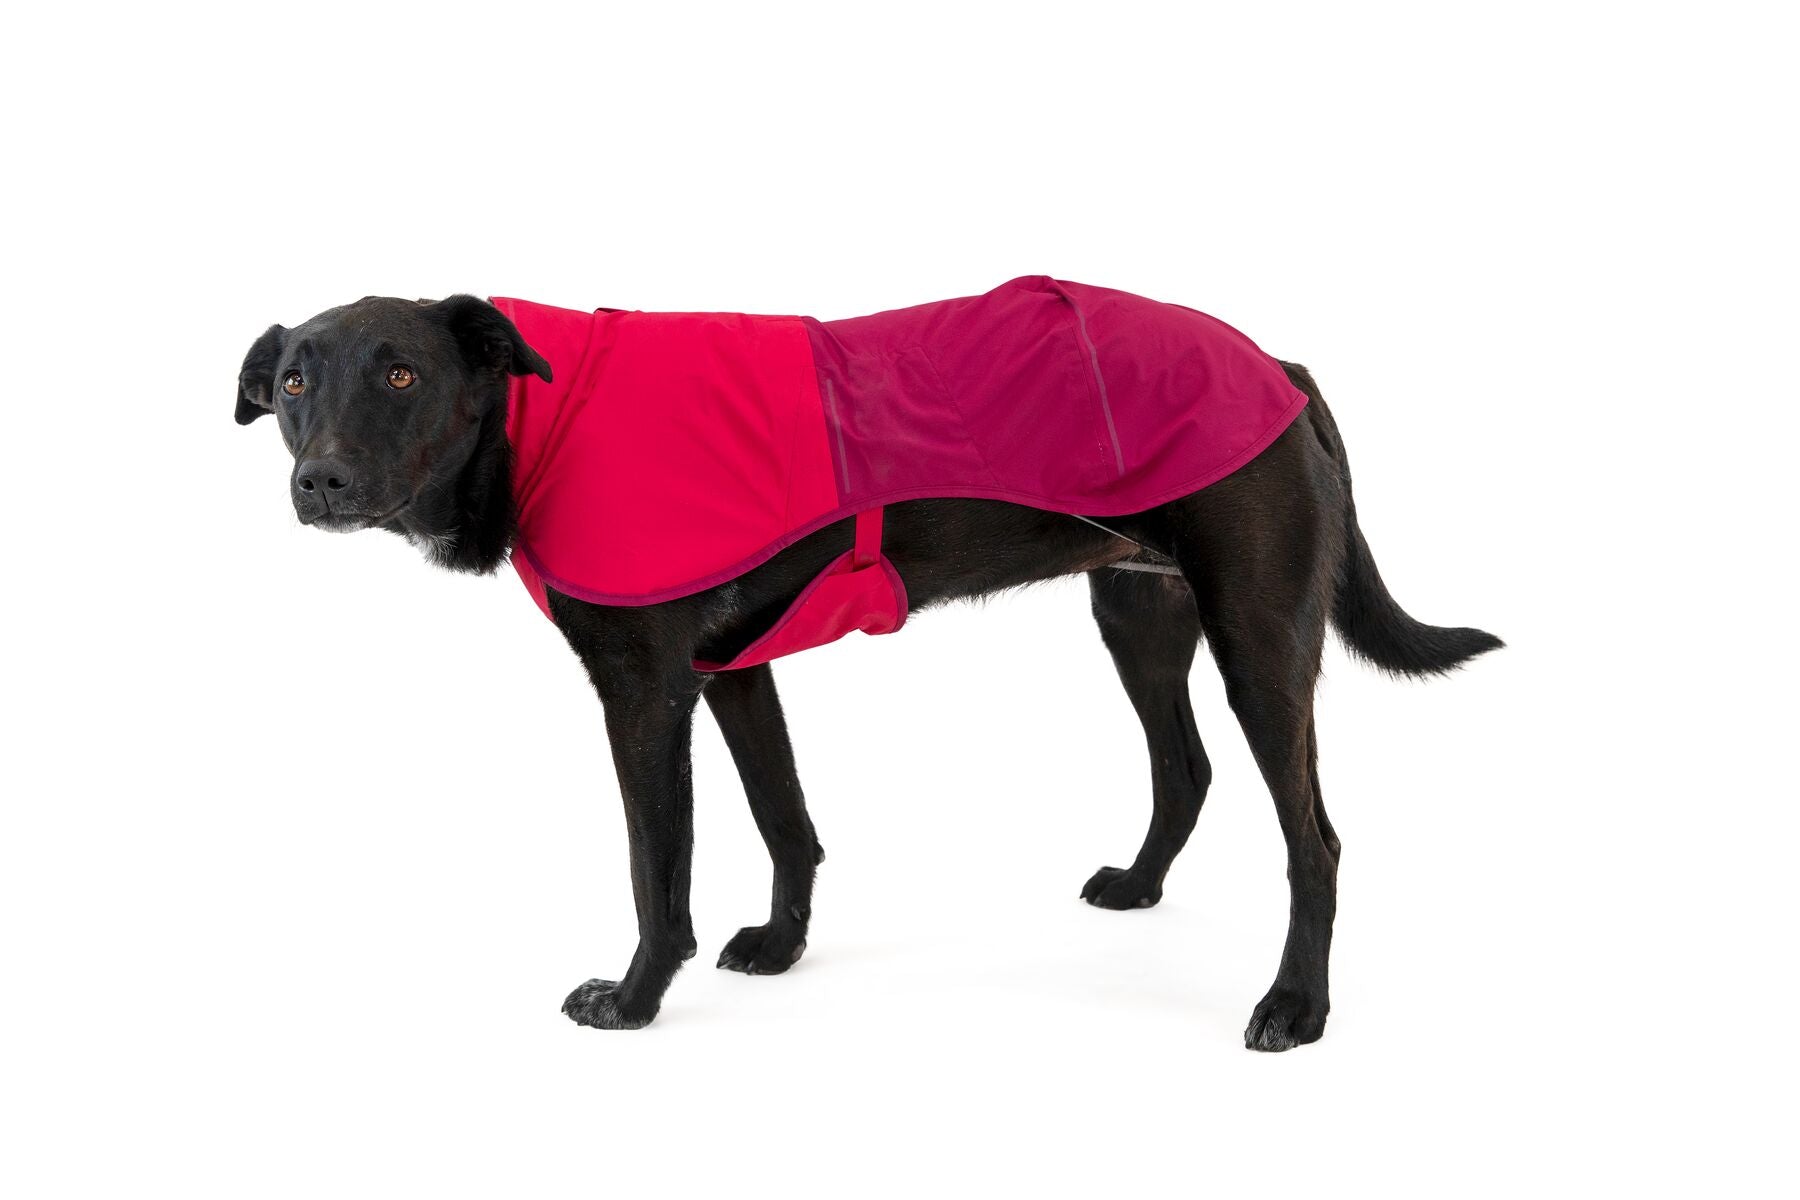 Sun Shower® Chaleco Impermeable para Perros- Rosa Magenta (Hibiscus Pink)- Ruffwear®